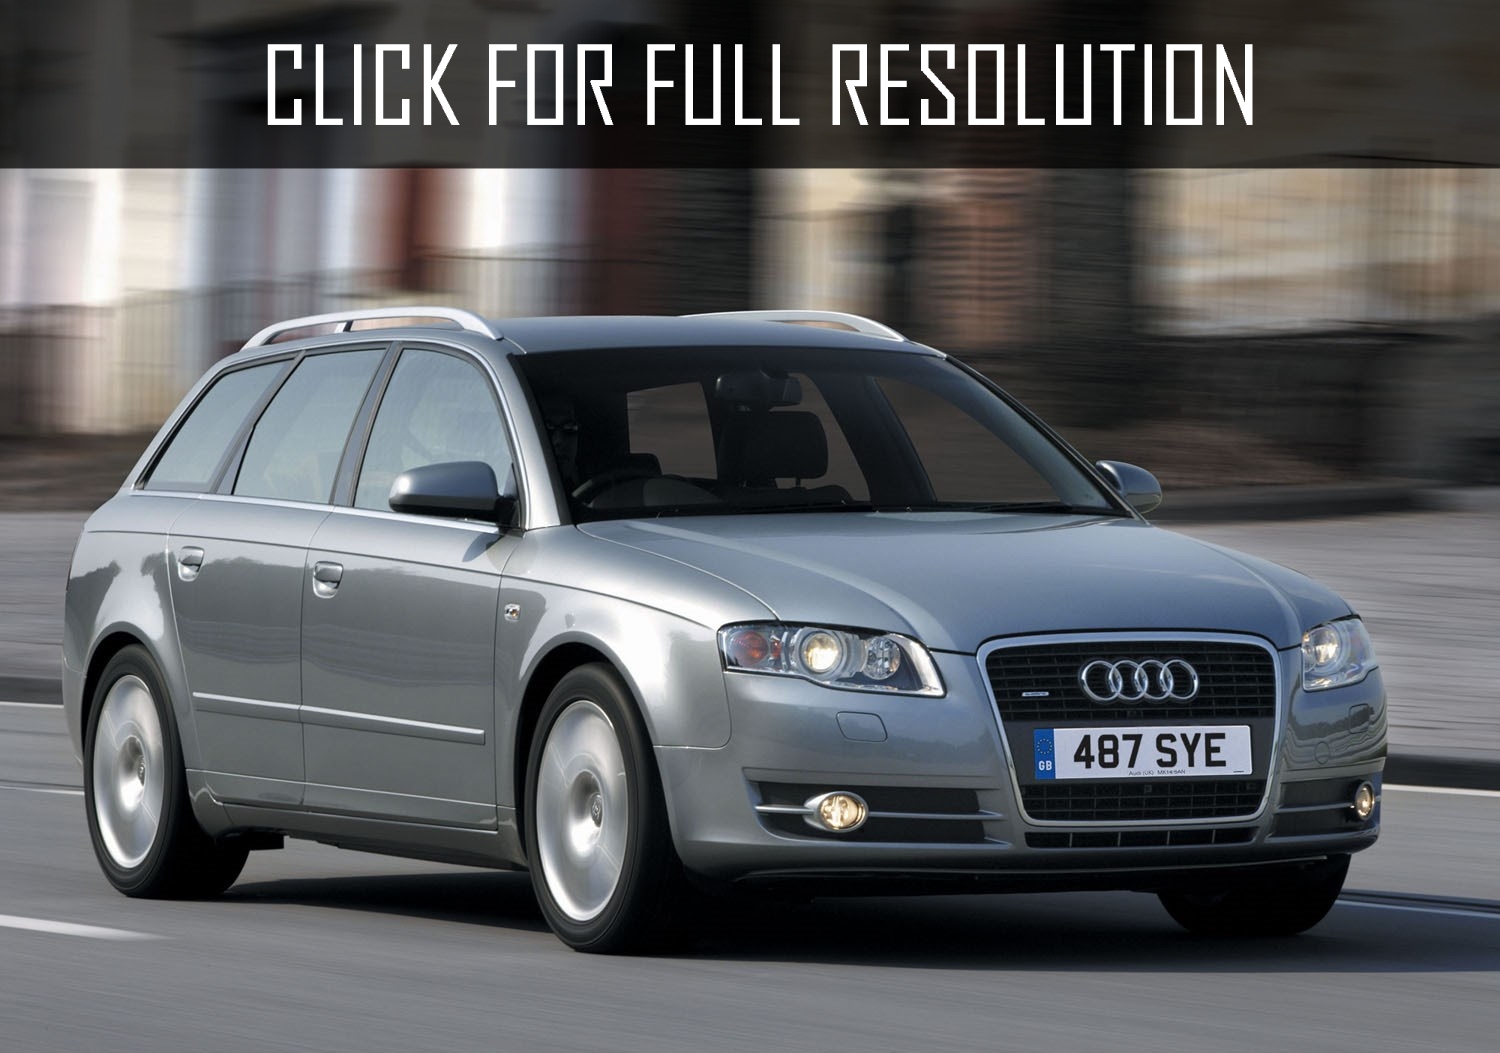 Audi A4 Avant best image gallery #14/22 - share and download